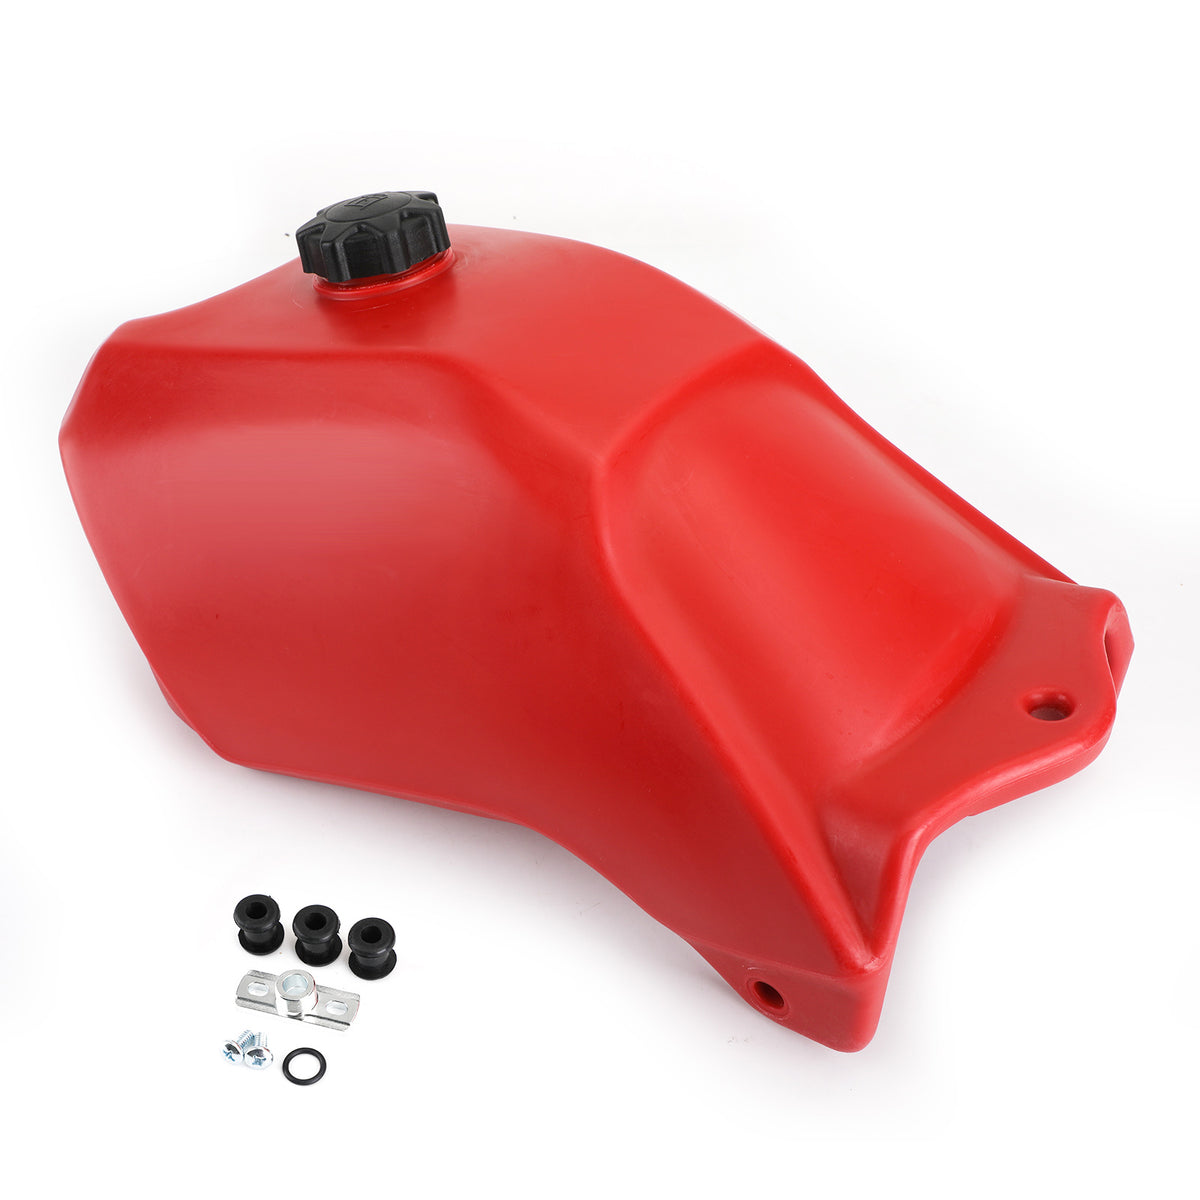 Honda Replacement Plastic Fuel Tank with Gas Cap FT49300R Fit For Honda TRX 300 Fourtrax 2WD 1988-1992